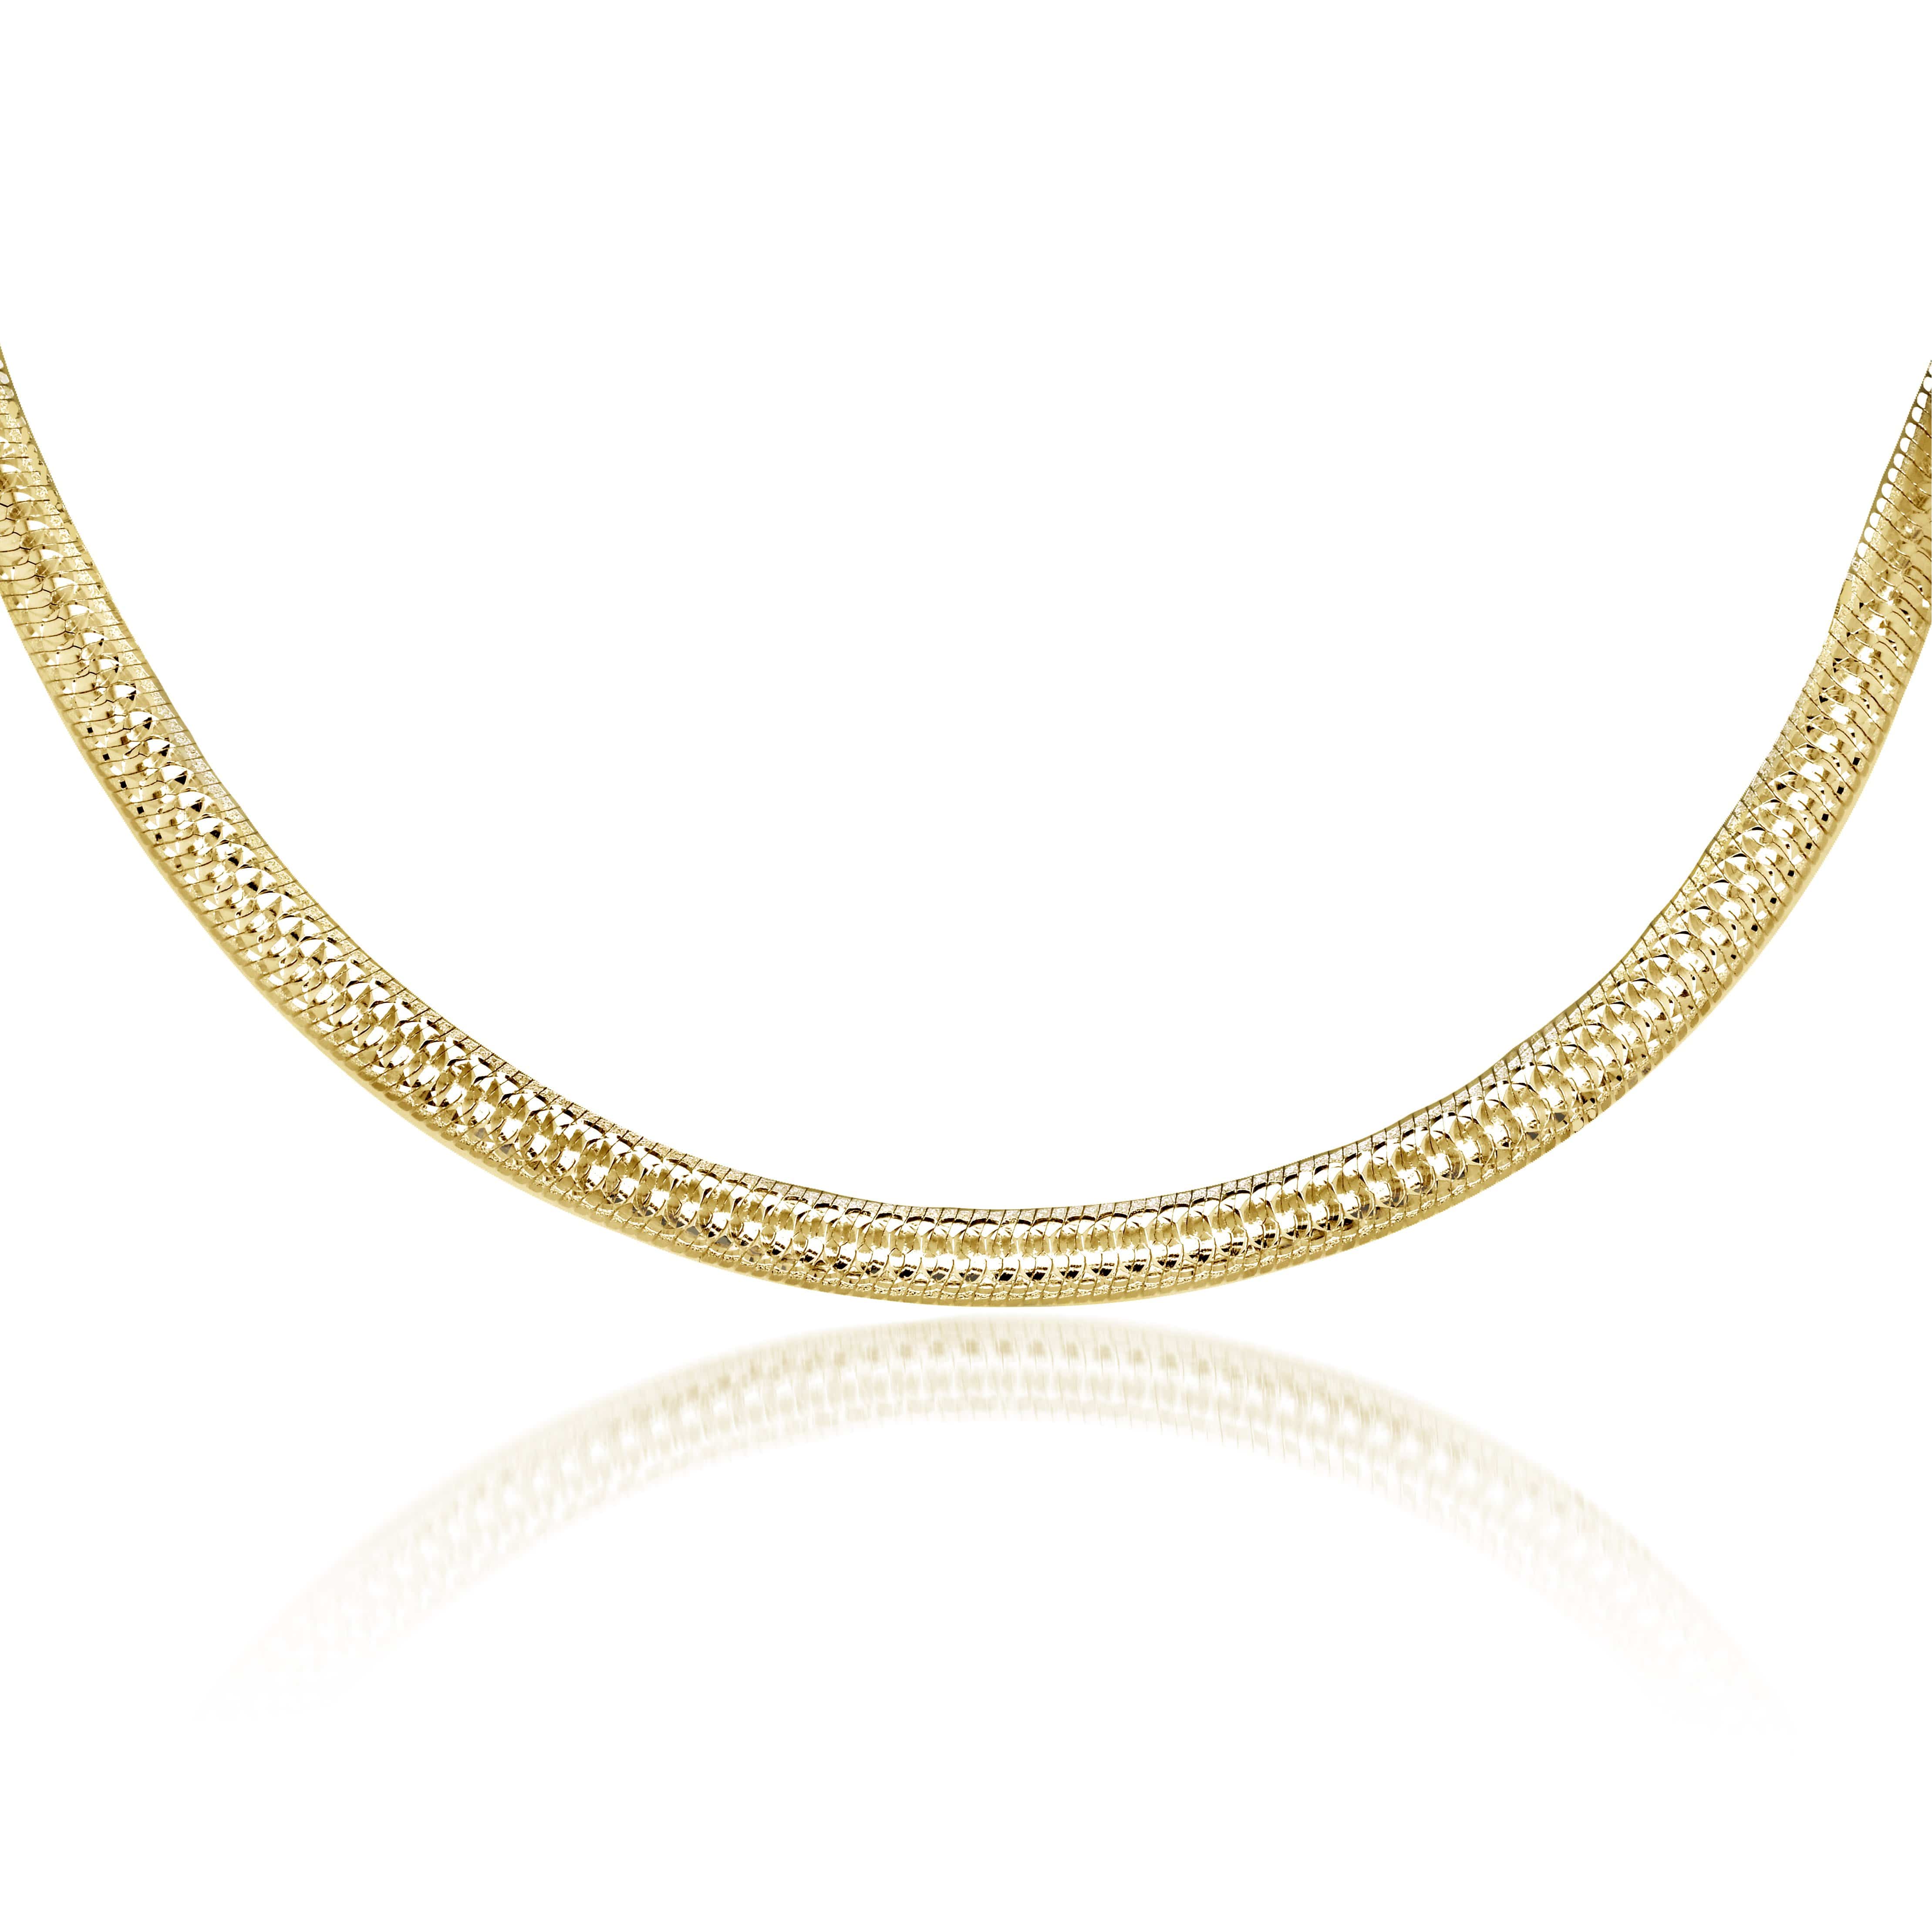 Lynora Jewellery Necklace 18" / Yellow Gold Plate Cobra Necklace Yellow Gold Plate